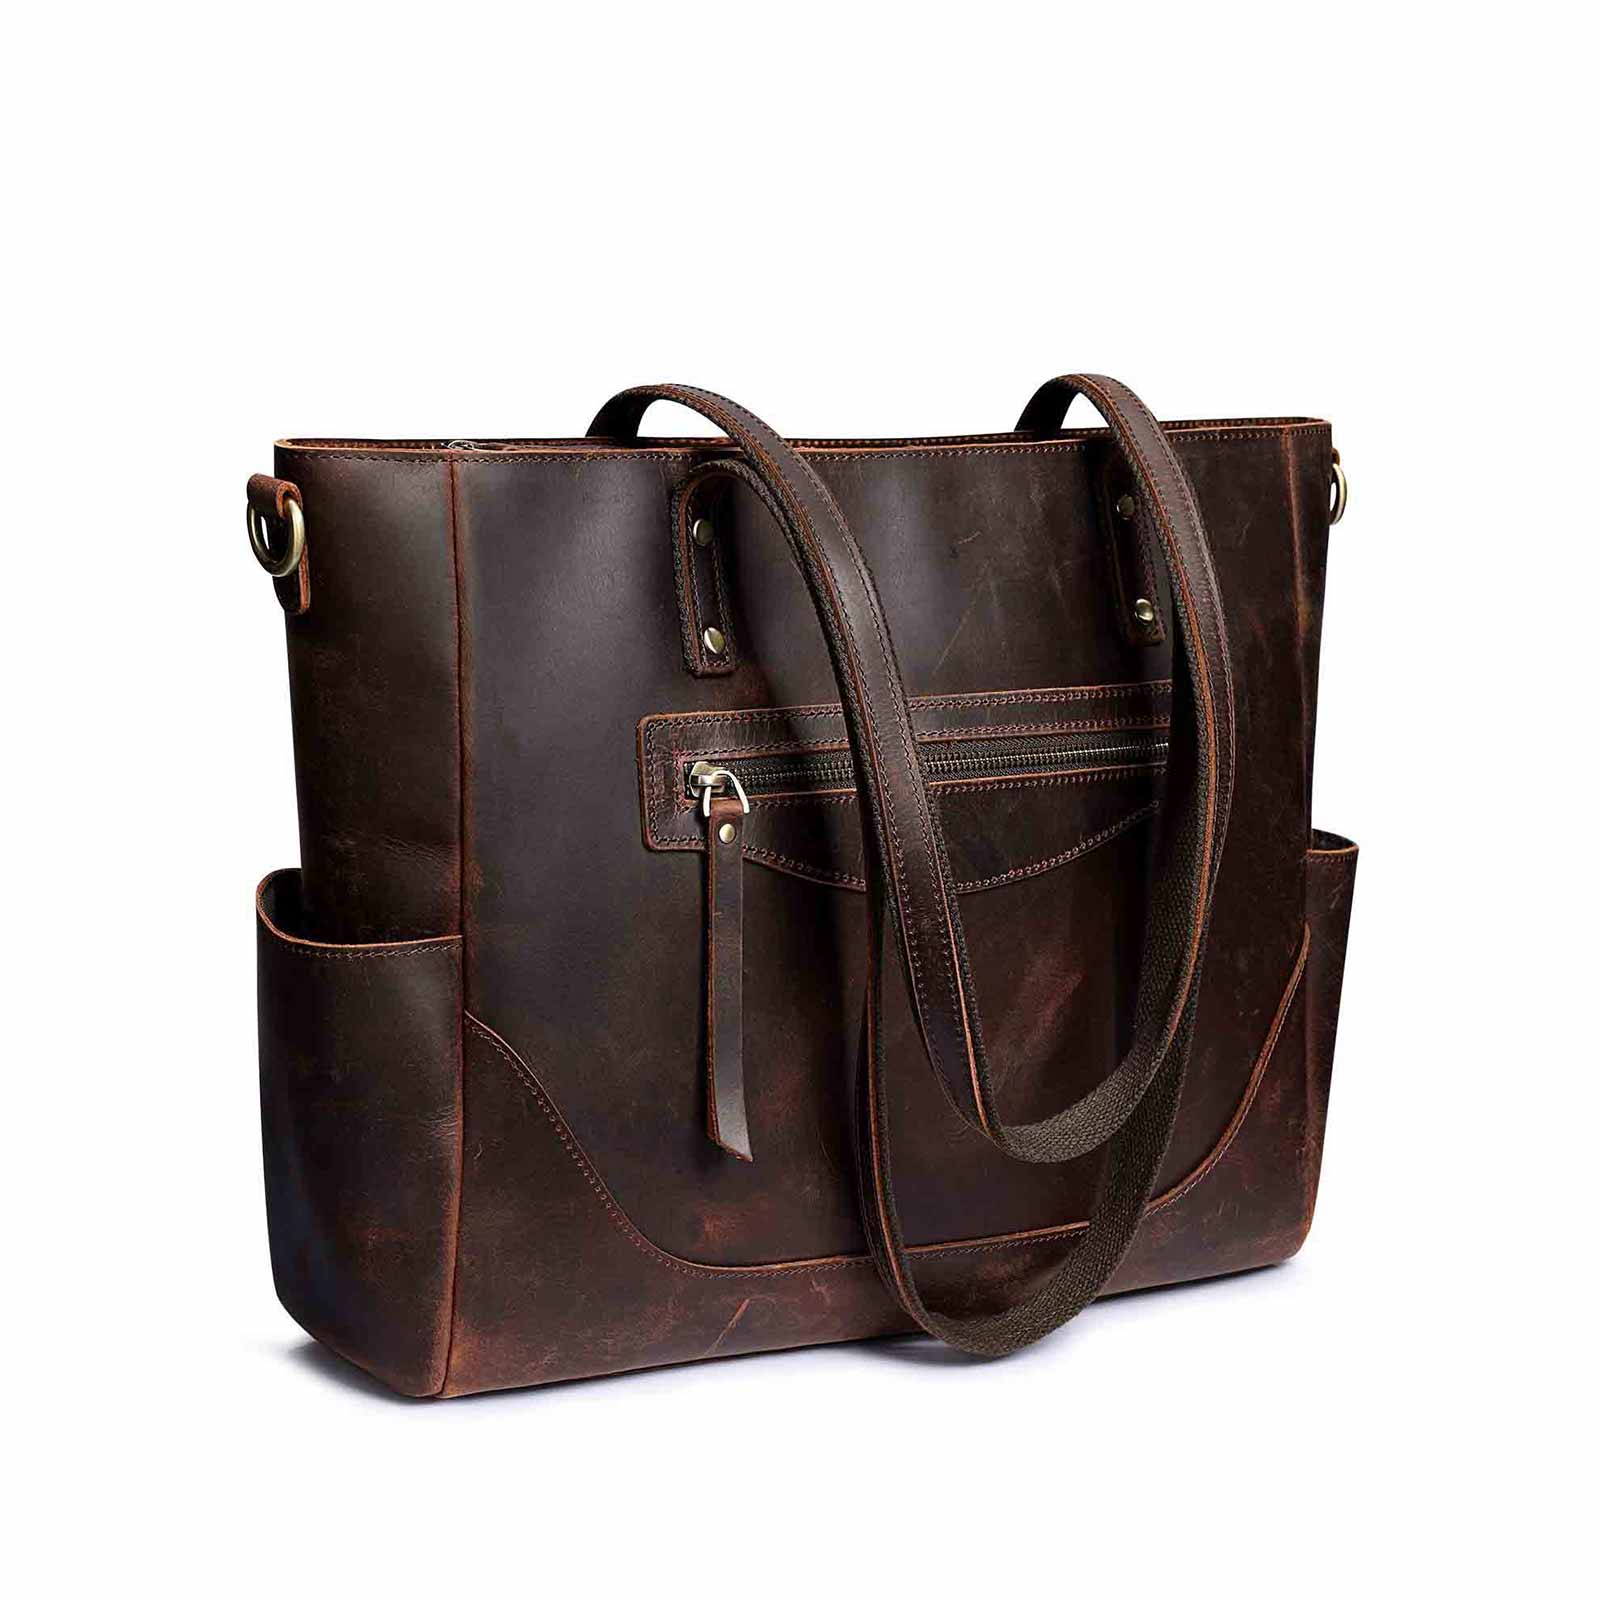 Shipping Within USA Only The Everyday Tote Togo Leather Shoulder Bag with Suede Organizer - Camel Brown